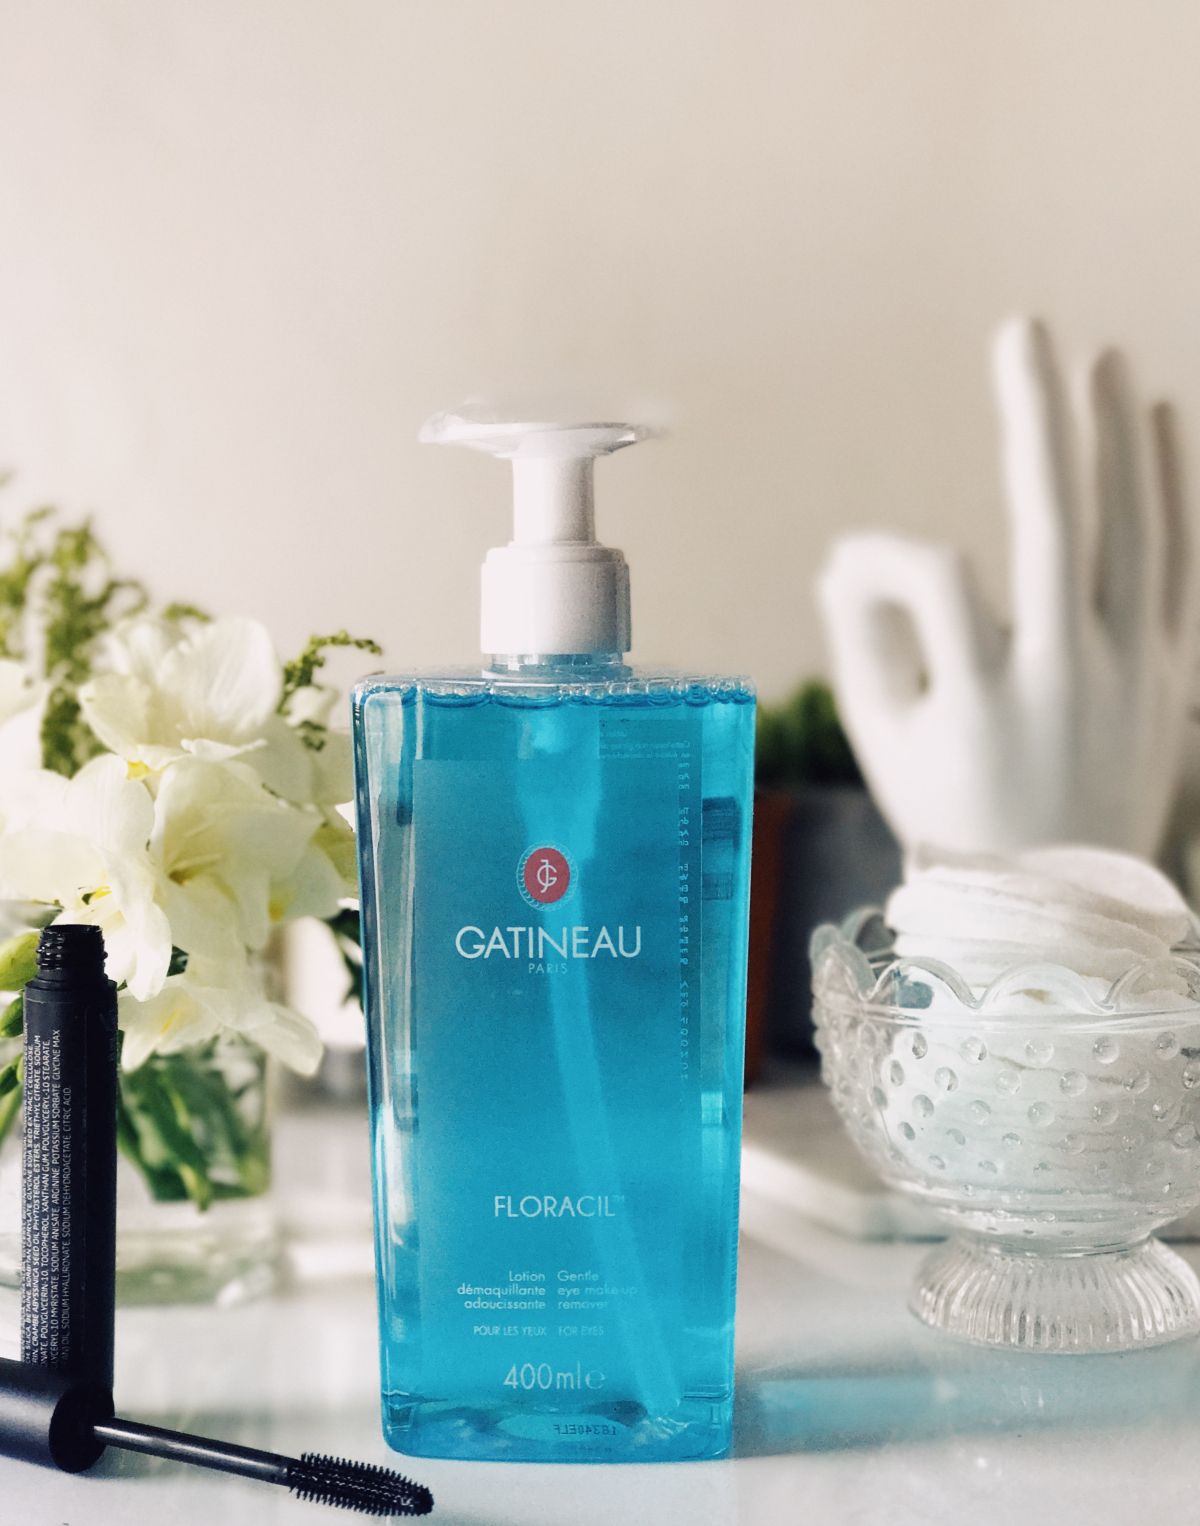 Gatineau Floracil Gentle Eye Make-Up Remover Review